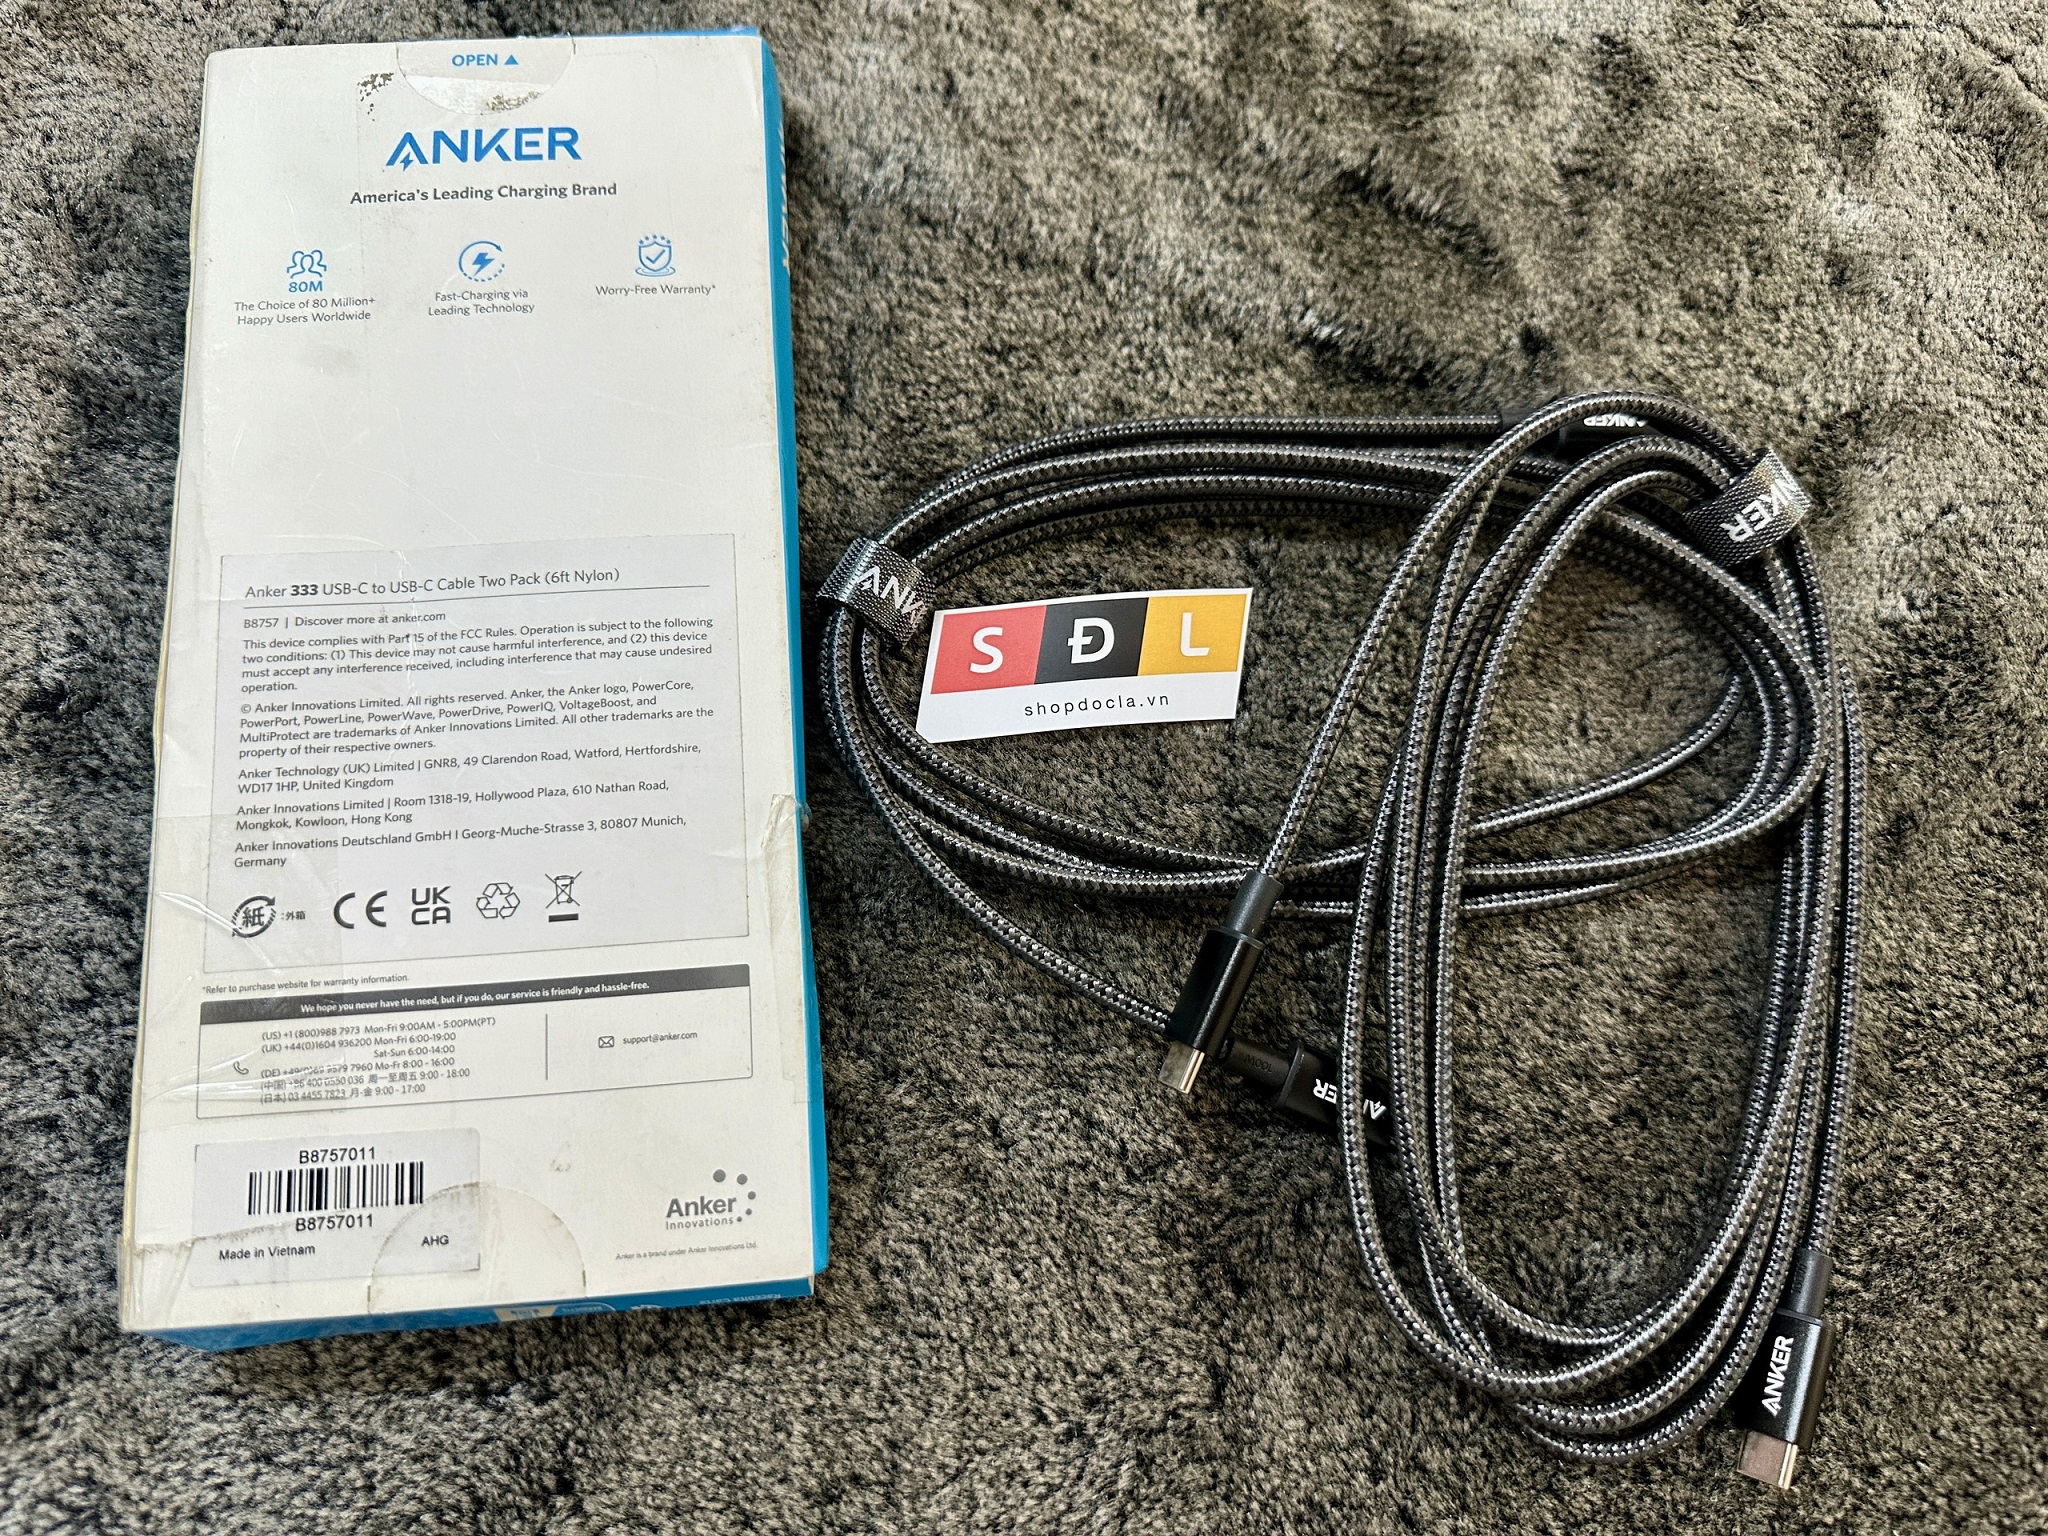 Anker 333 USB-C to USB-C Cable 1.8m 100W B8757